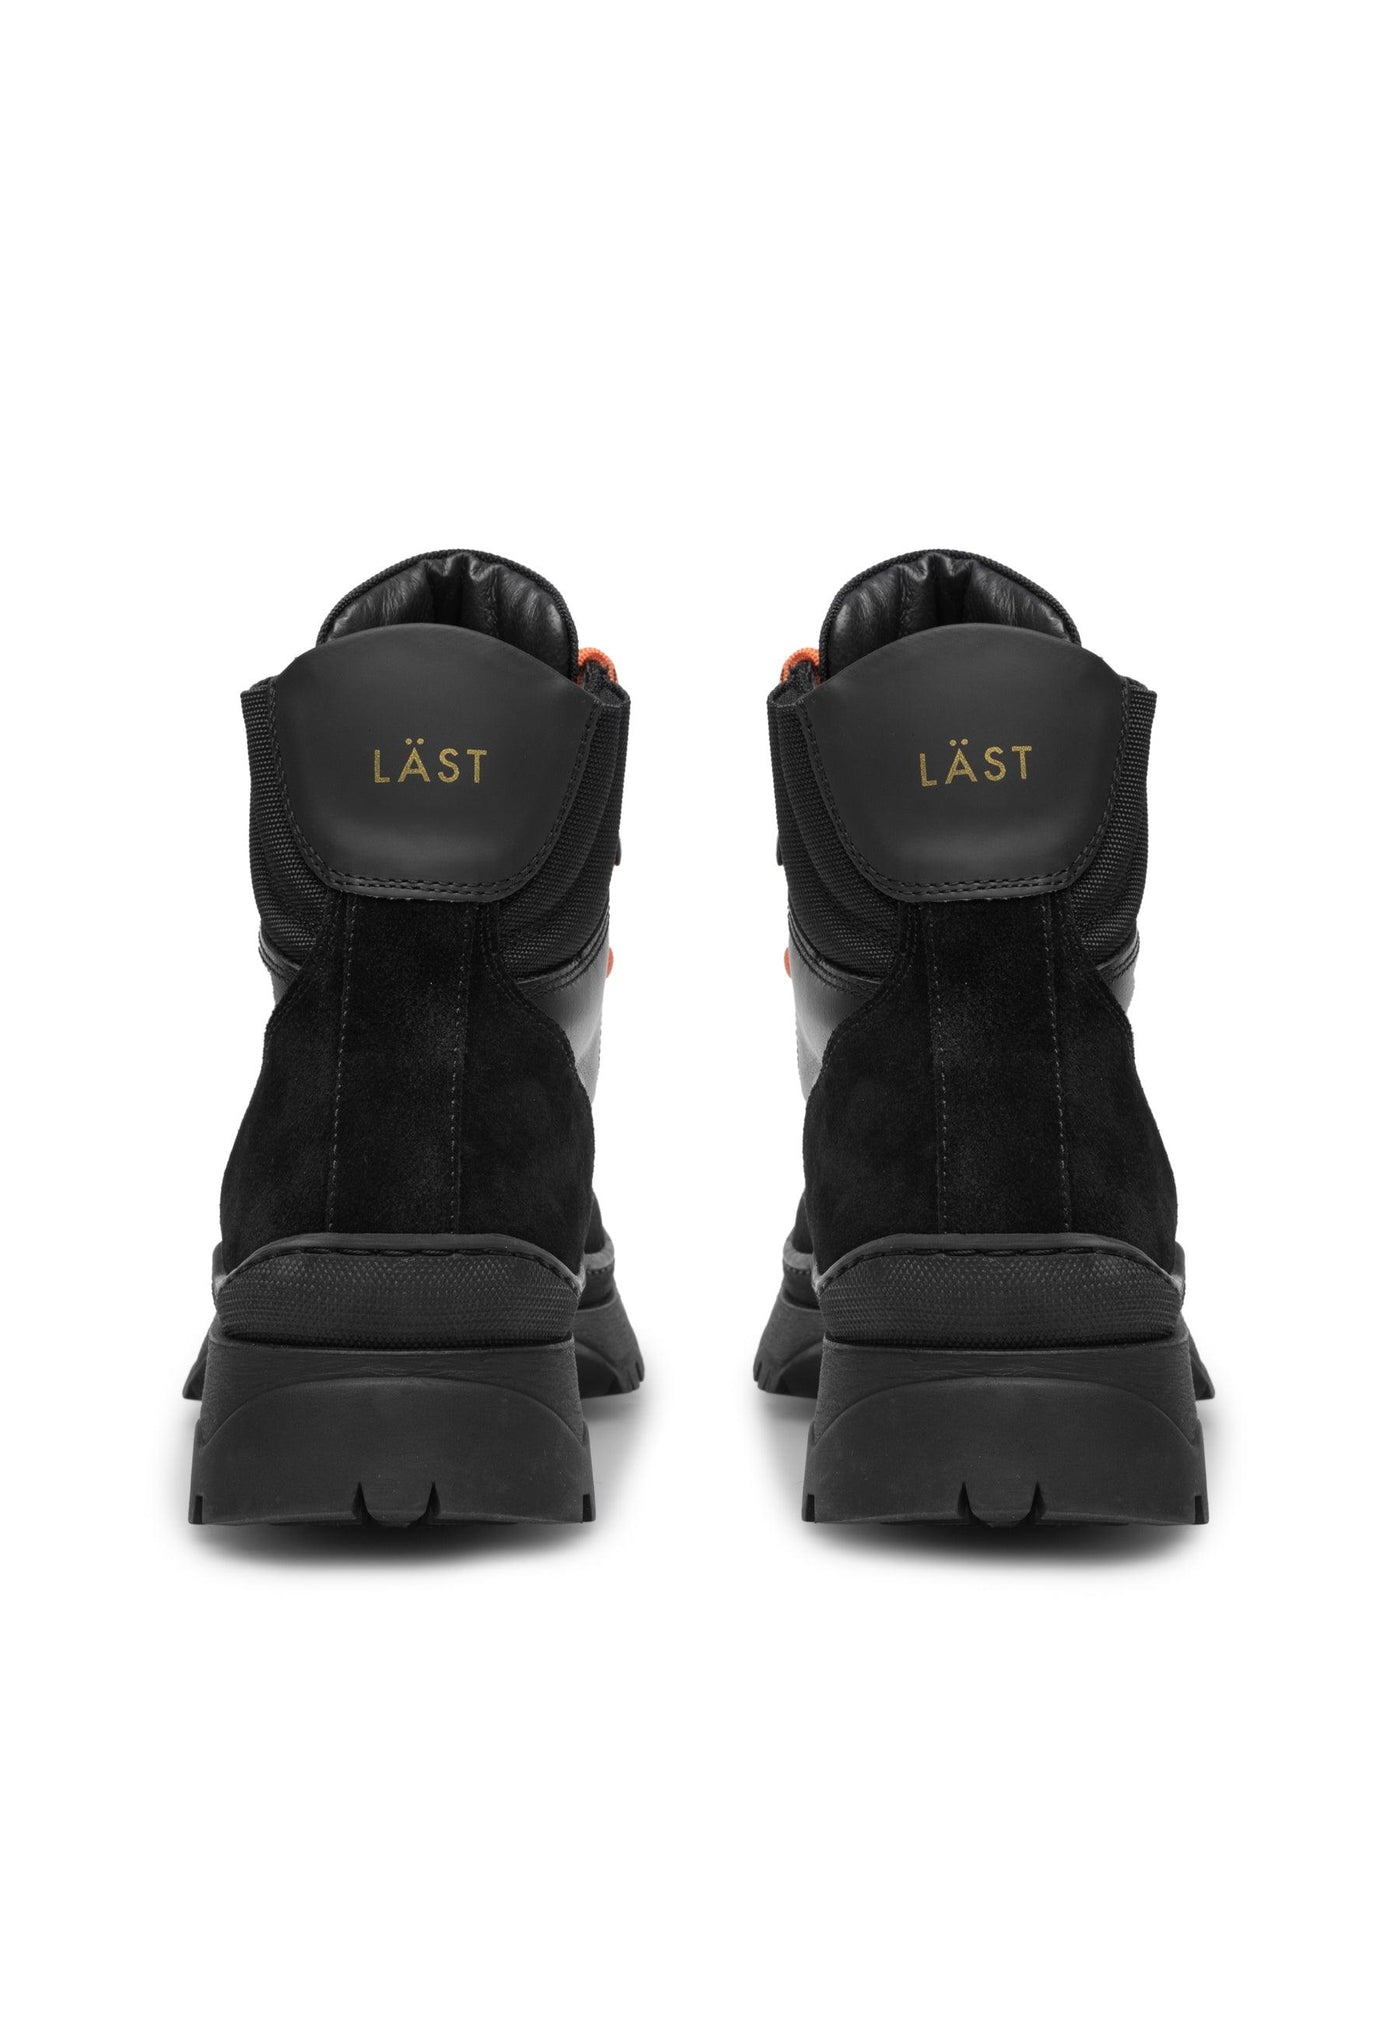 LÄST Downhill Boot - Leather/Suede/PES - Black High Boots Black